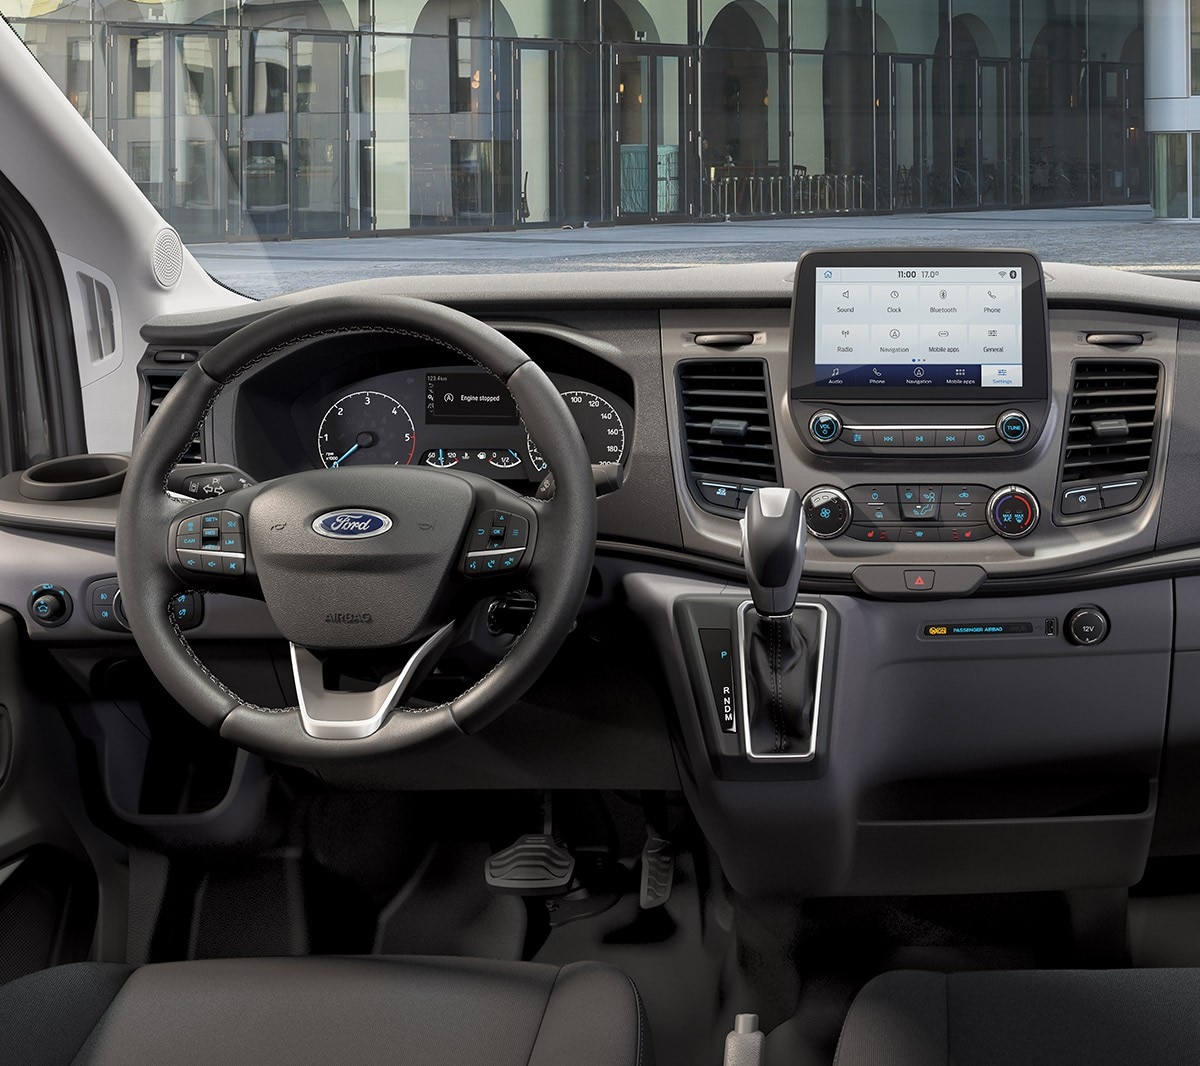 All New Ford Transit Chassis Cab interior view